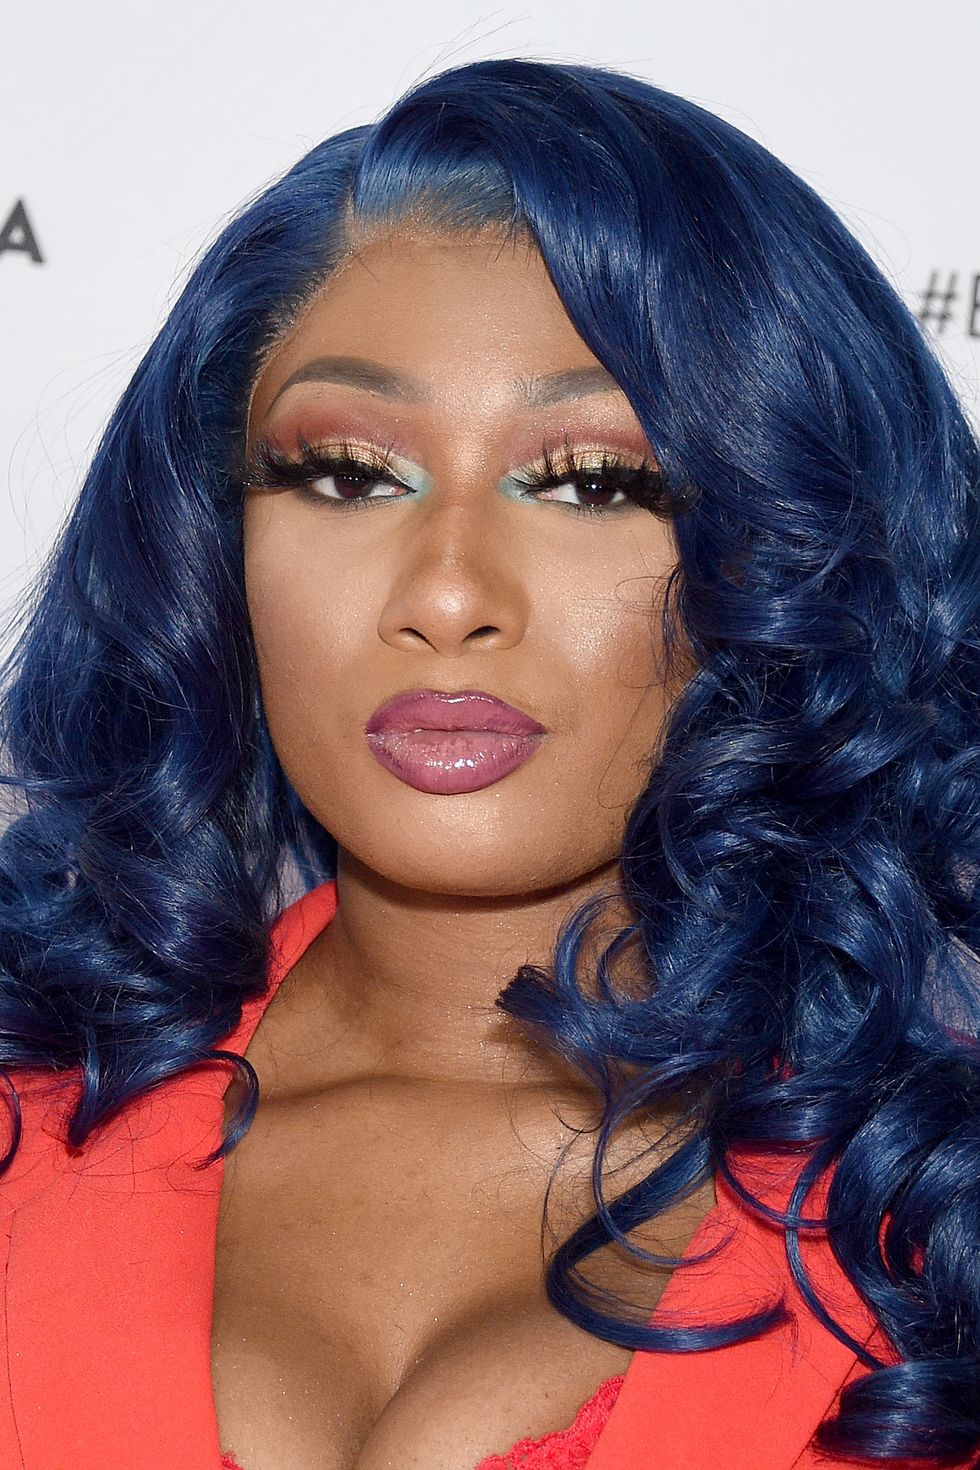 los angeles, ca   august 11  megan thee stallion attends beautycon los angeles 2019 day 2 pink carpet at los angeles convention center on august 11, 2019 in los angeles, california  photo by gregg deguirefilmmagic